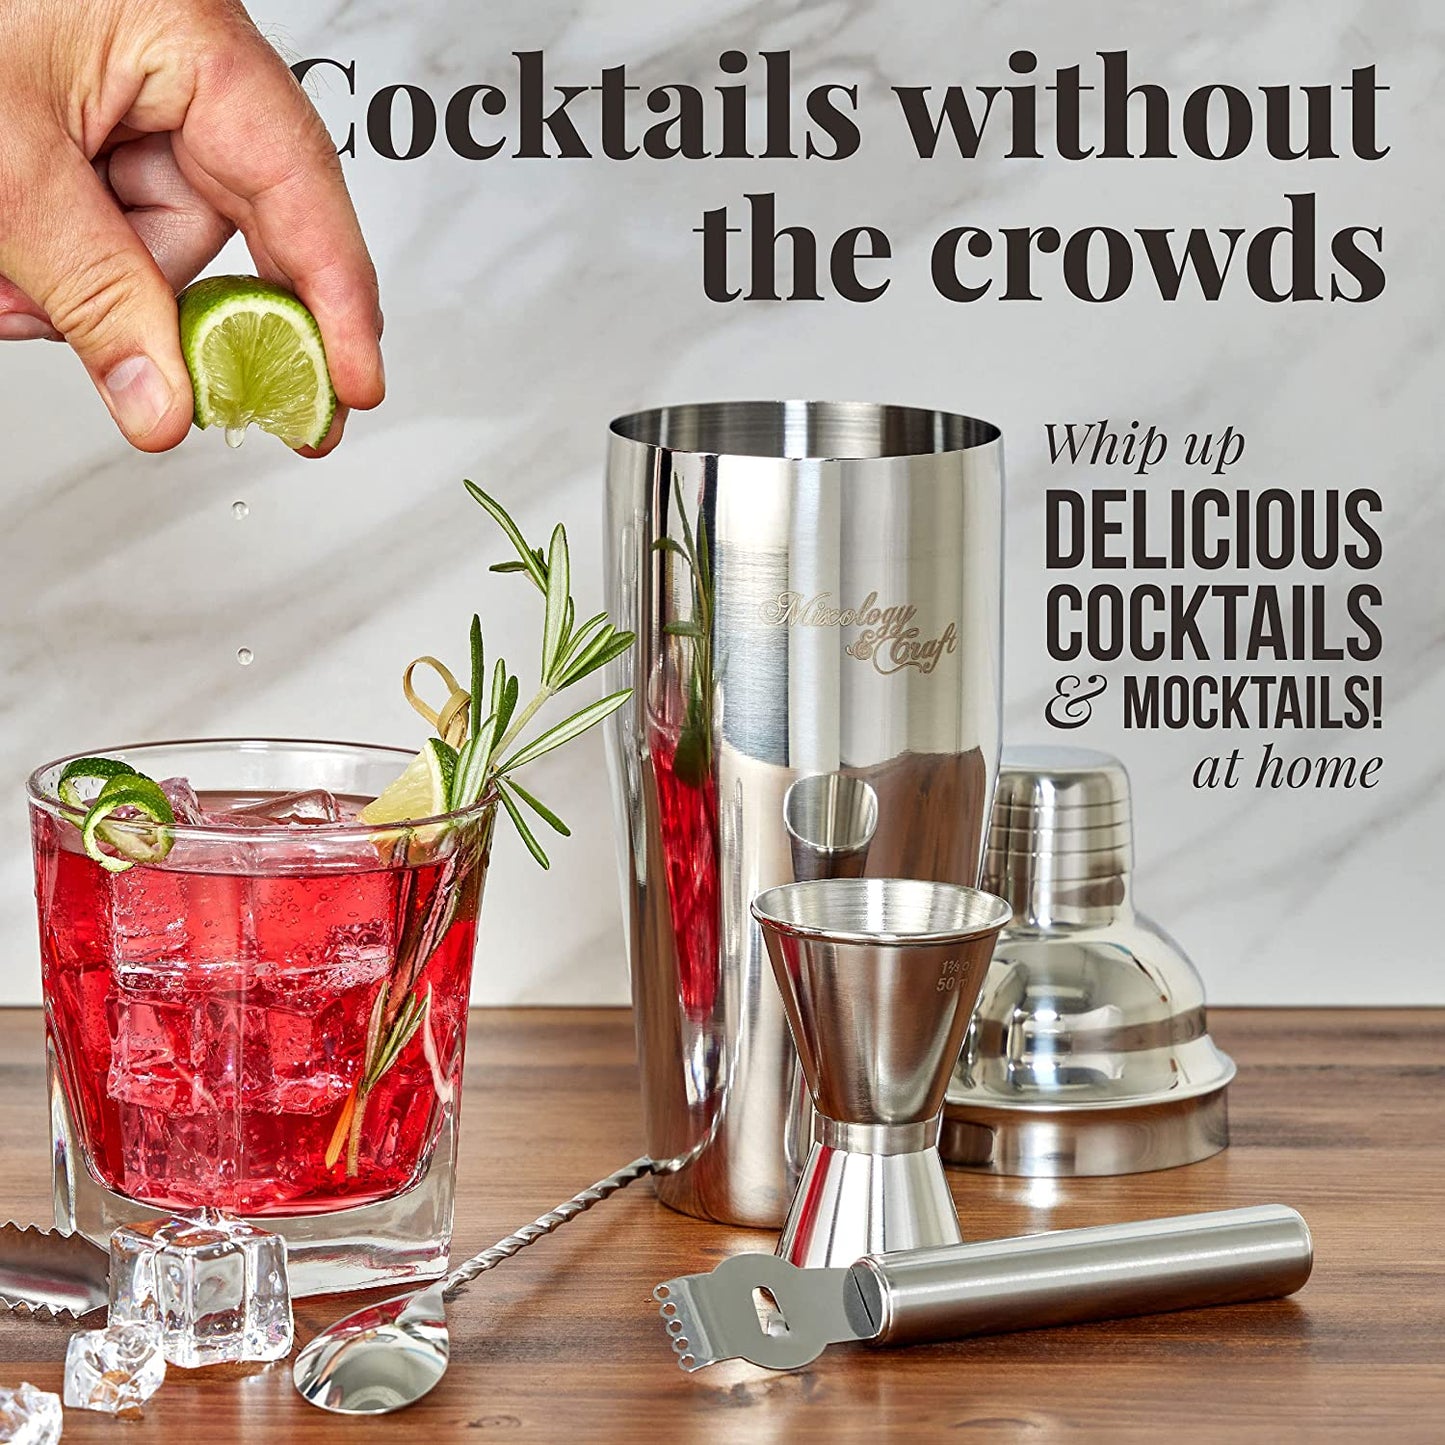 Craft Bartender Kit - 15 Piece Set Including Cocktail Shaker and Bar Accessories, Perfect for Drink Mixing at Home, Plus Exclusive Recipe Cards